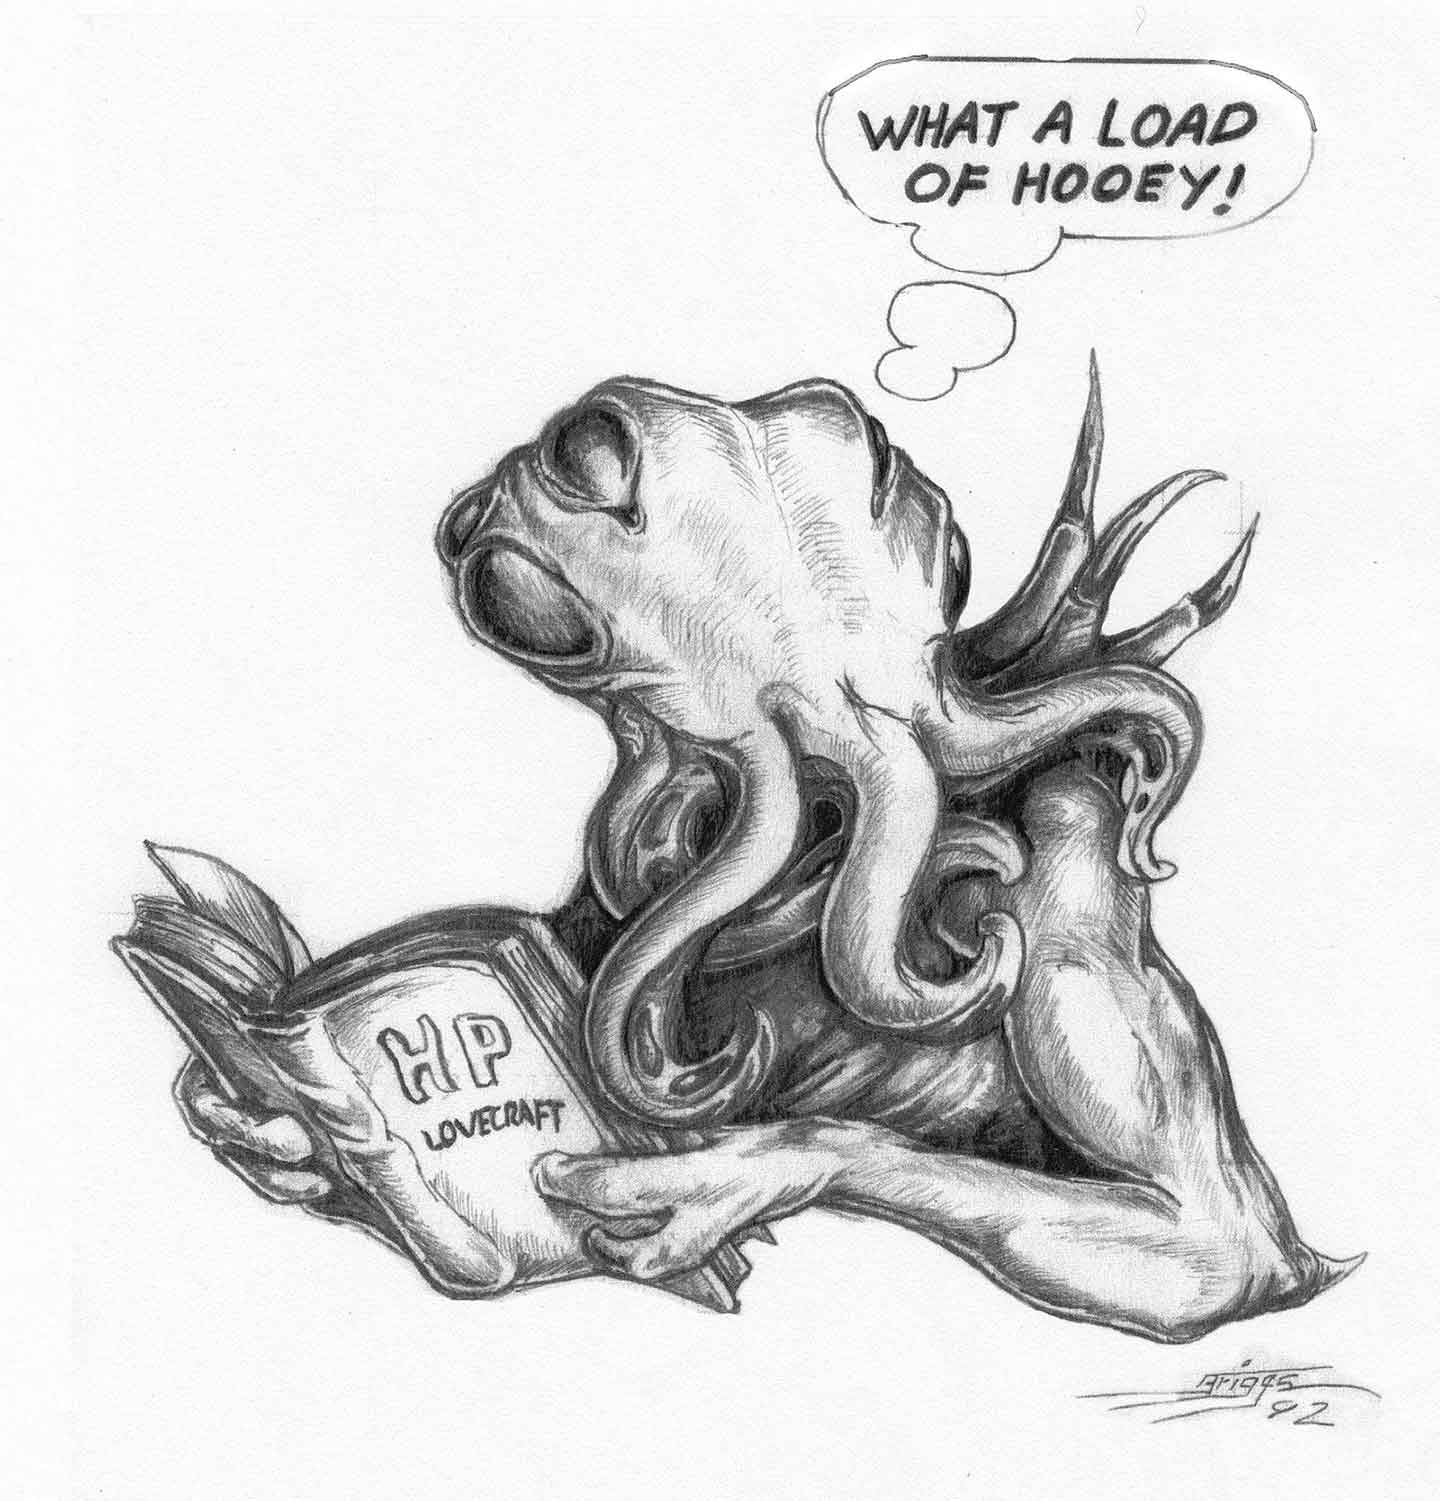 cthulhu reads lovecraft